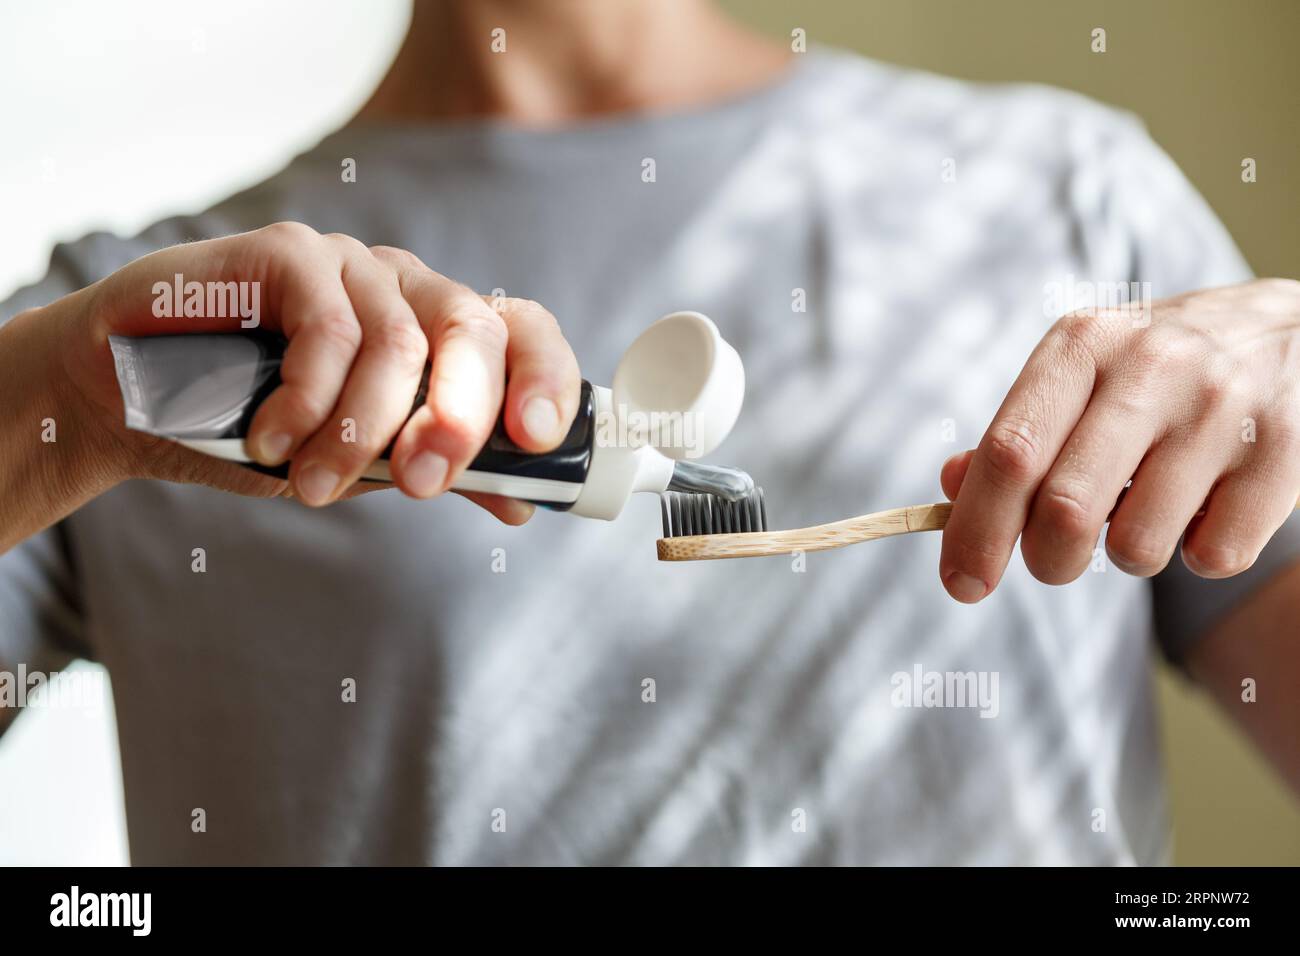 Applying toothpaste on a bamboo tooth brush. Hands squeezing tube with a toothpaste. Dentistry and hygenic concept. Stock Photo